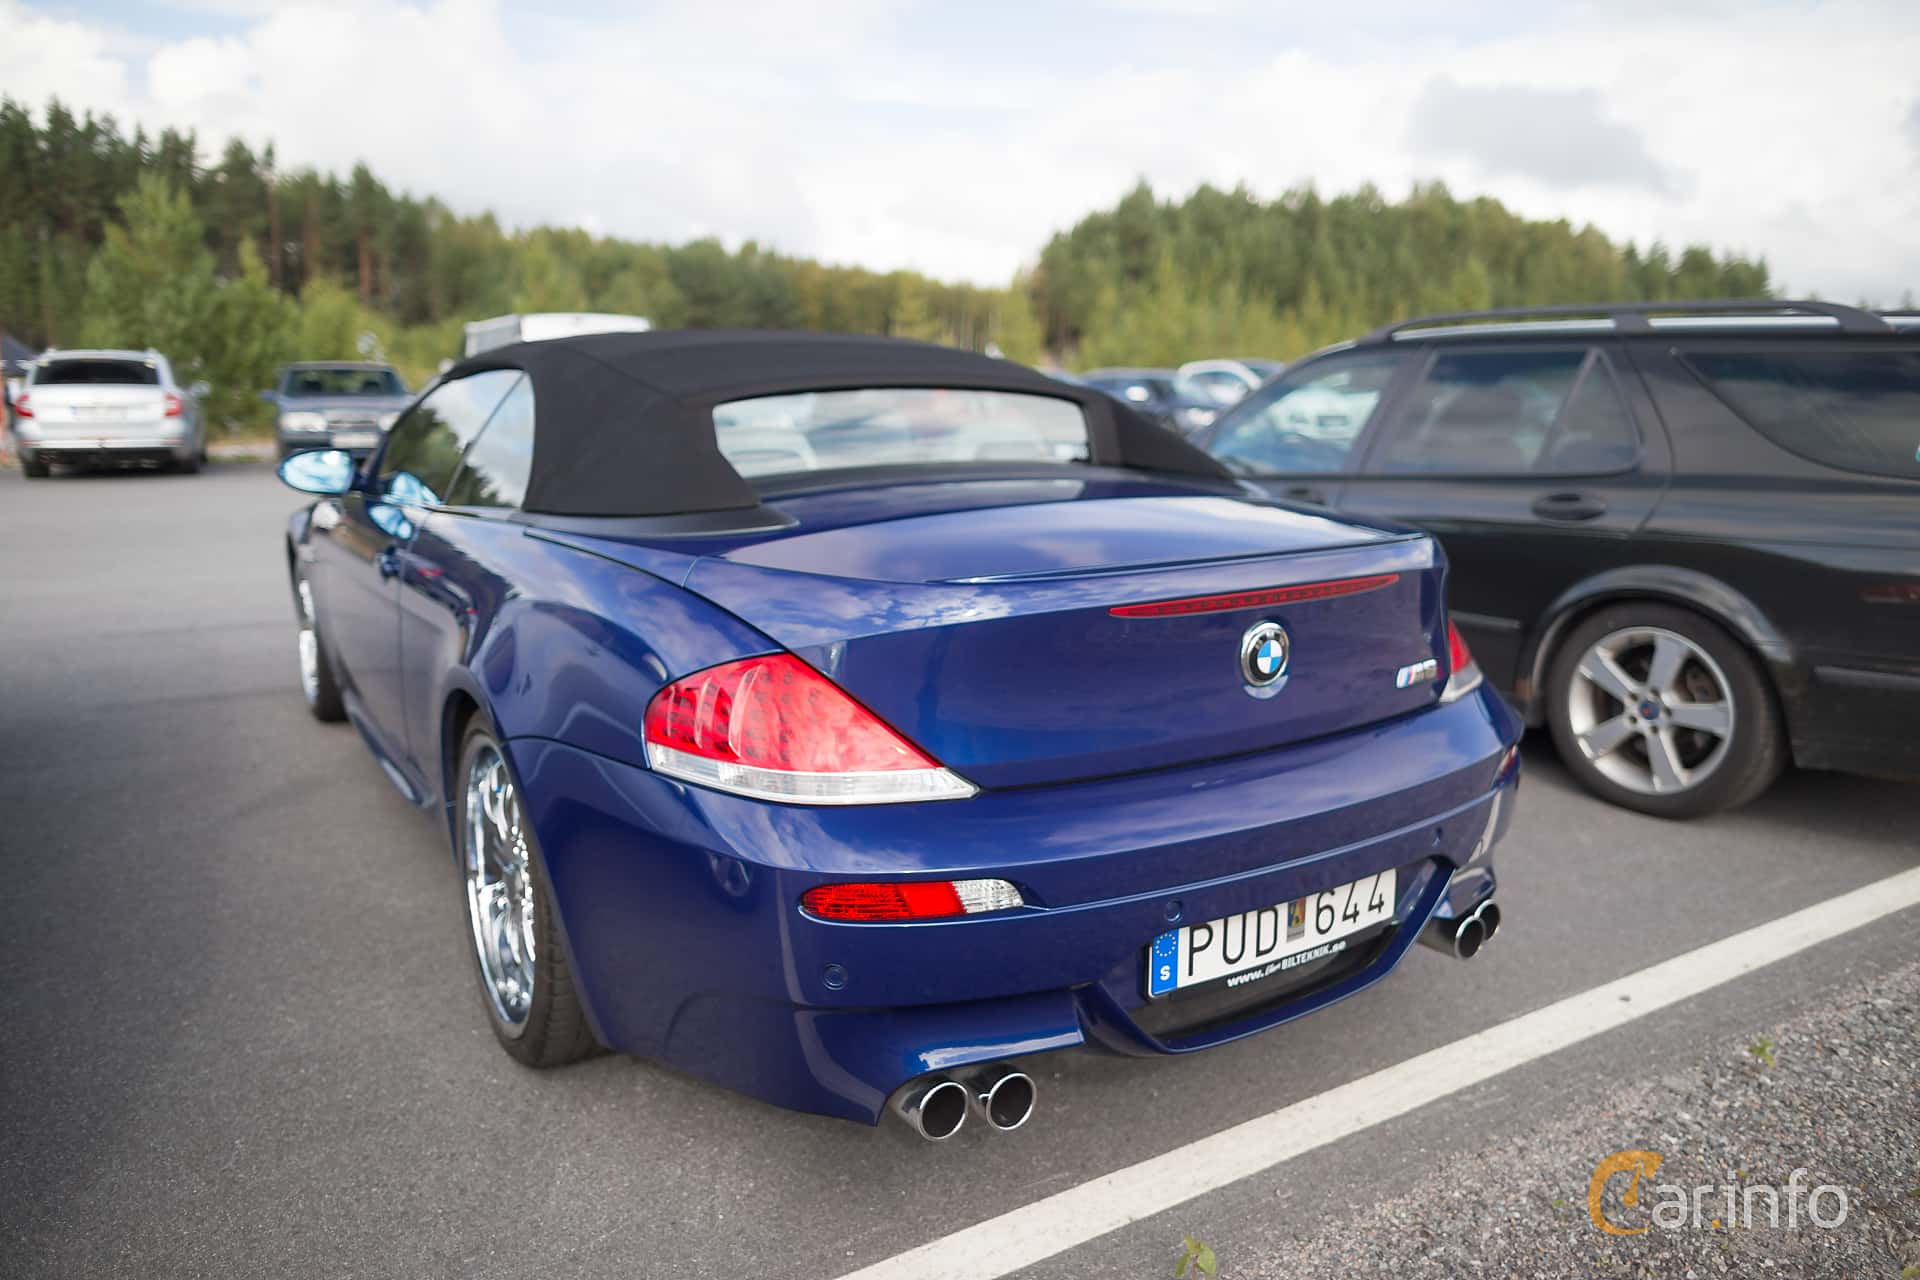 2 Images Of Bmw M6 Convertible Automatic 507hp 07 By Marcusliedholm